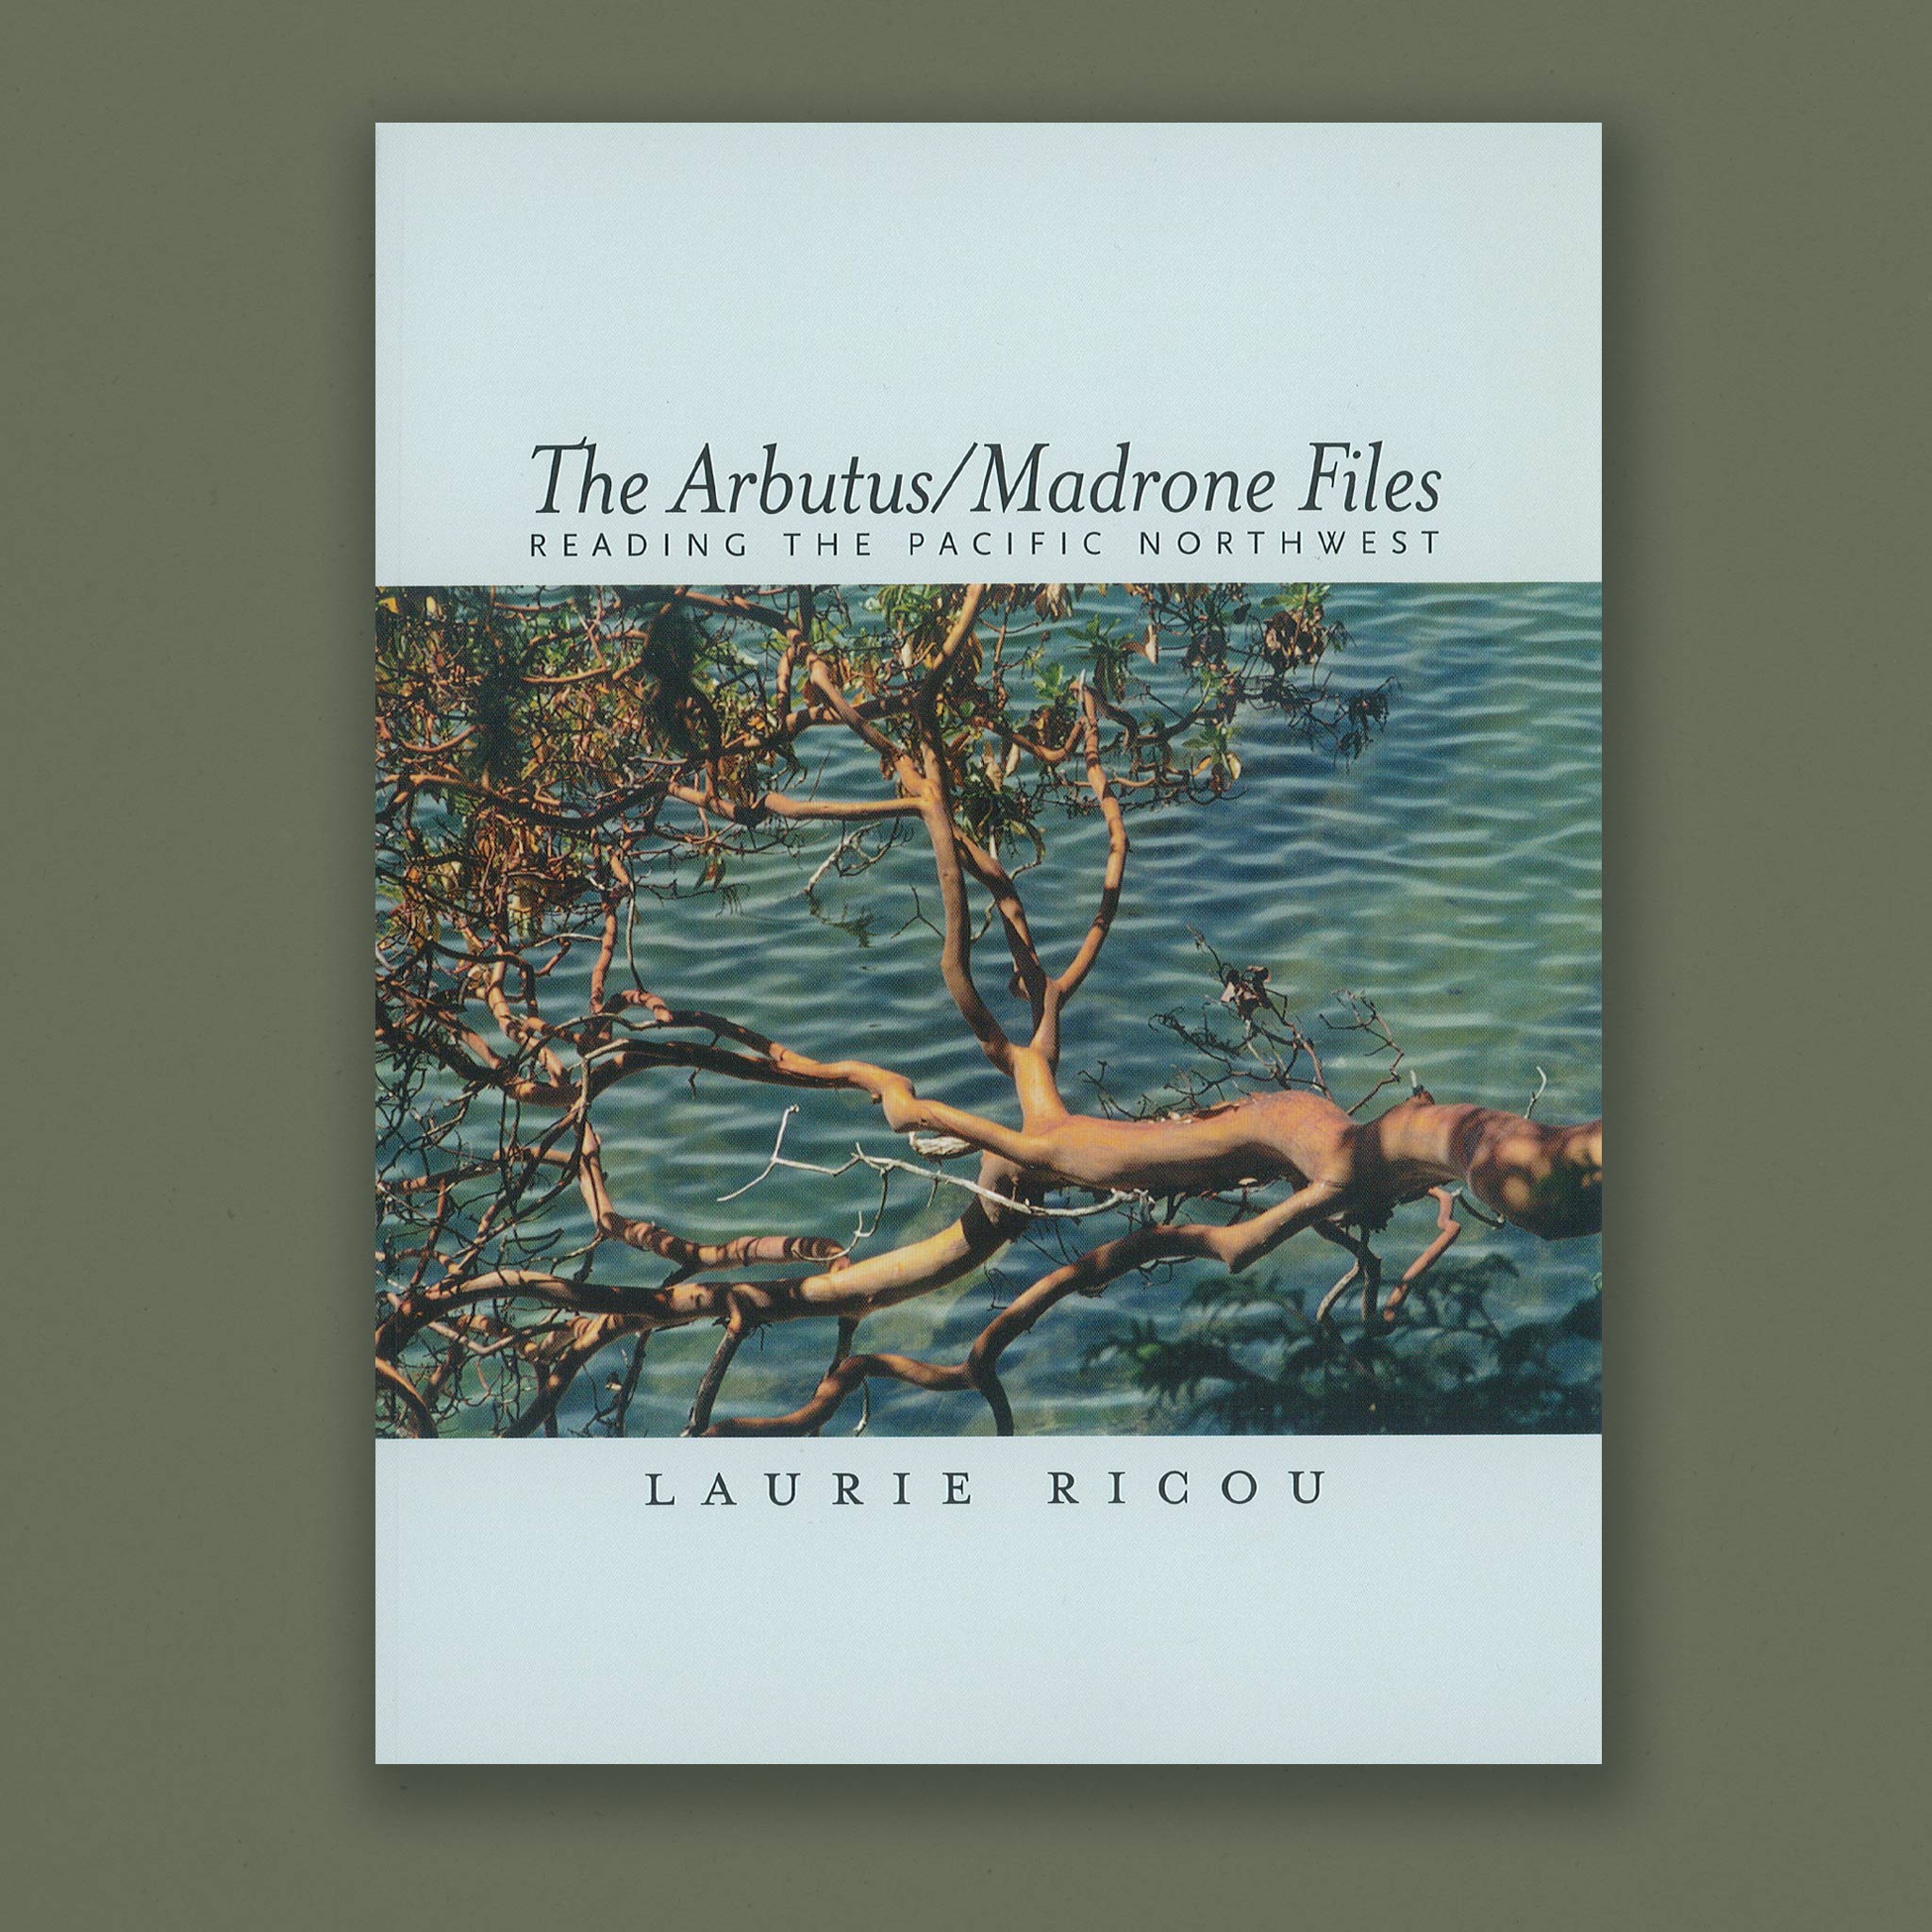 The Arbutus/Madrone Files: Reading The Pacific Northwest